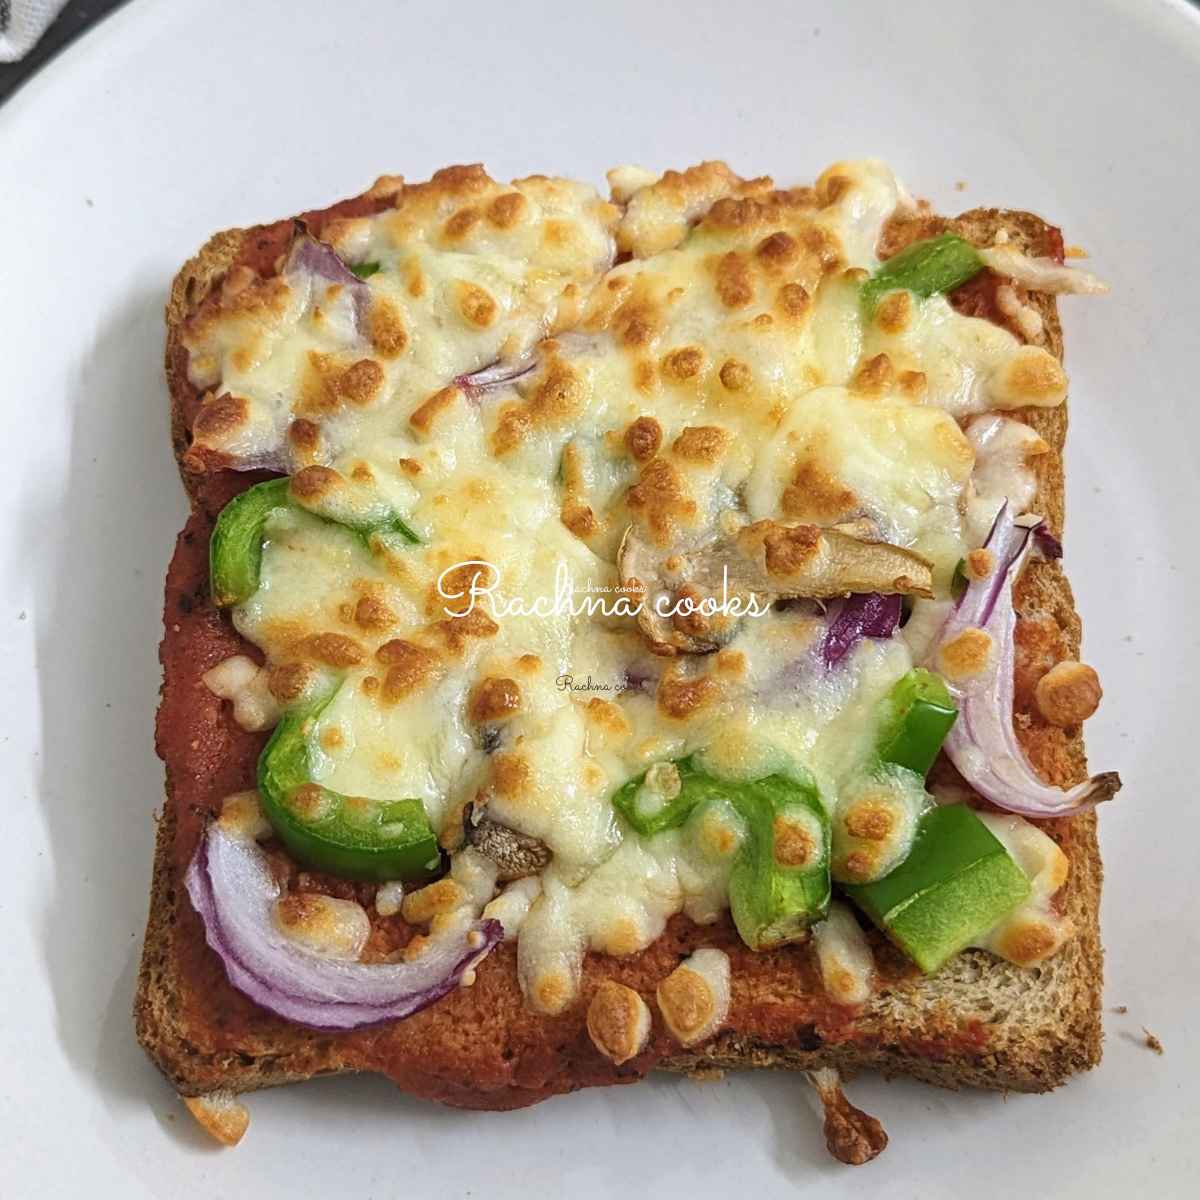 One slice of bread pizza on a white plate